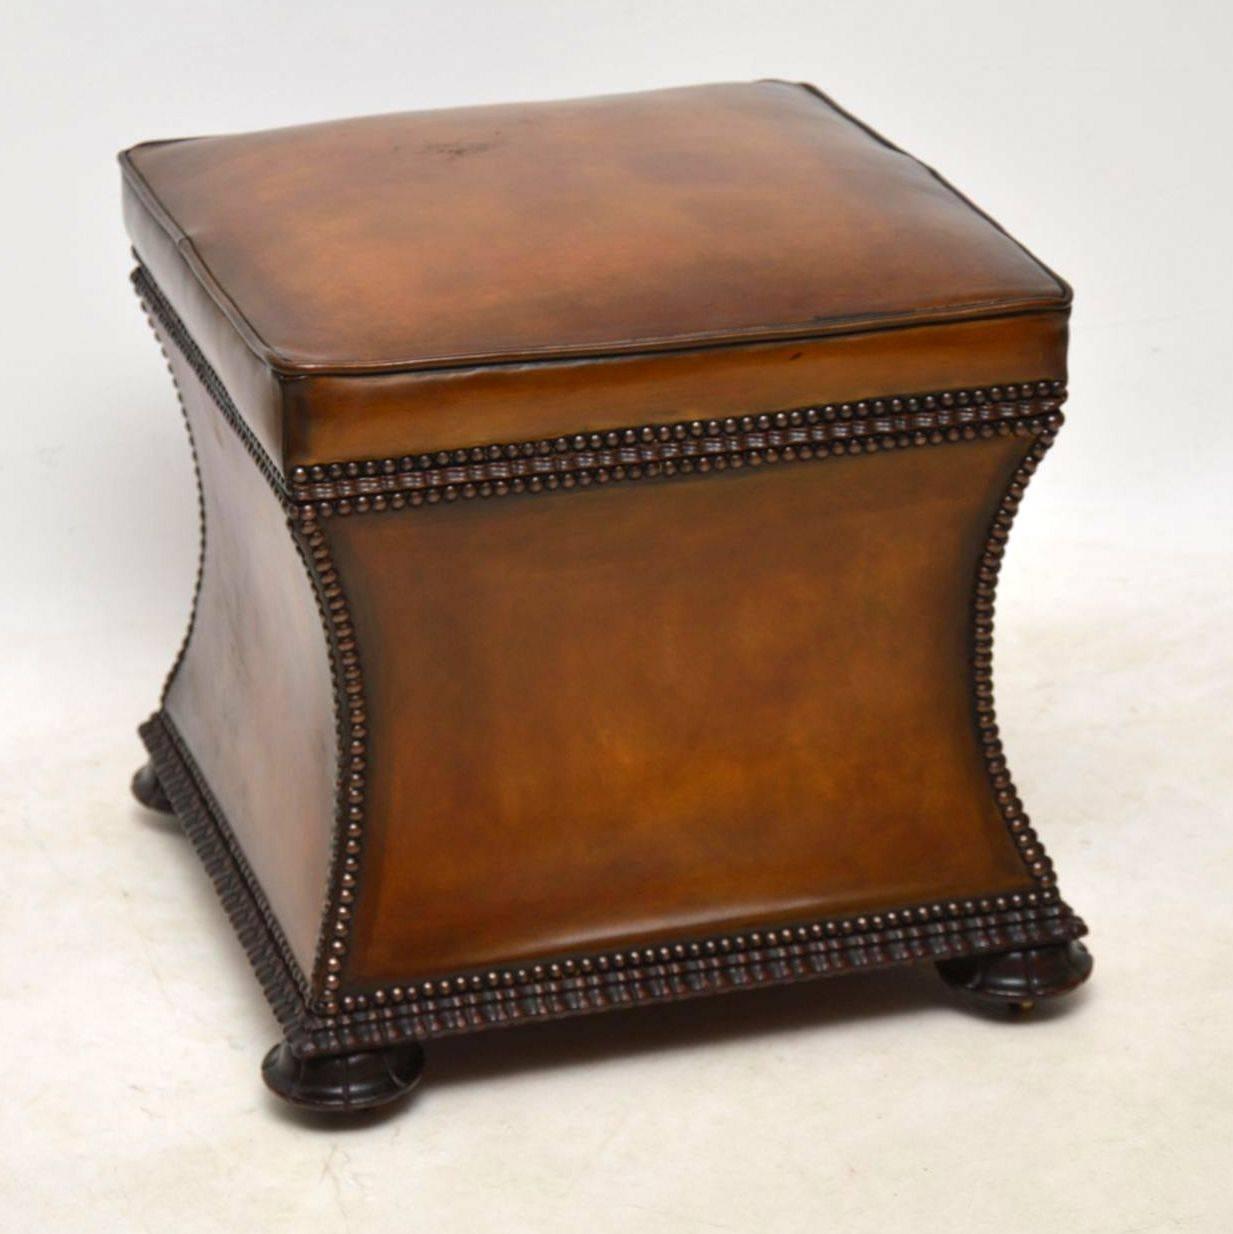 Antique William IV leather upholstered ottoman with useful storage inside. It has a padded seat, concave sides and a hinged seat that lifts up to reveal a newly upholstered interior. The leather is hand colored showing loads of character and it's